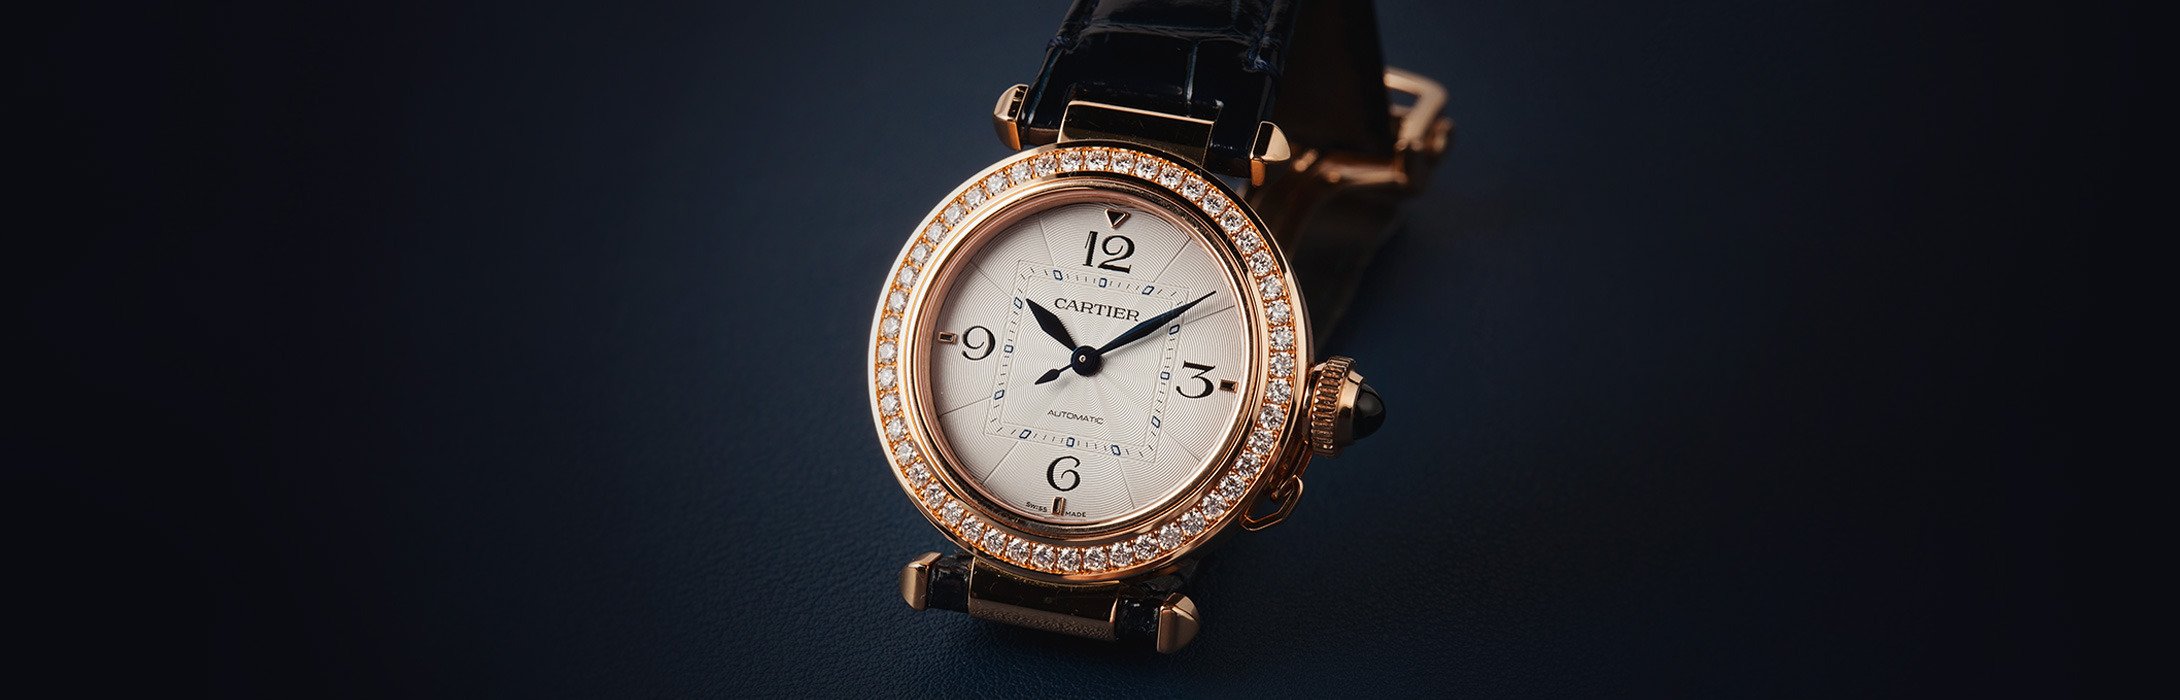 What's Collecting Dust In Your Jewelry Box? If It's Cartier, Omega